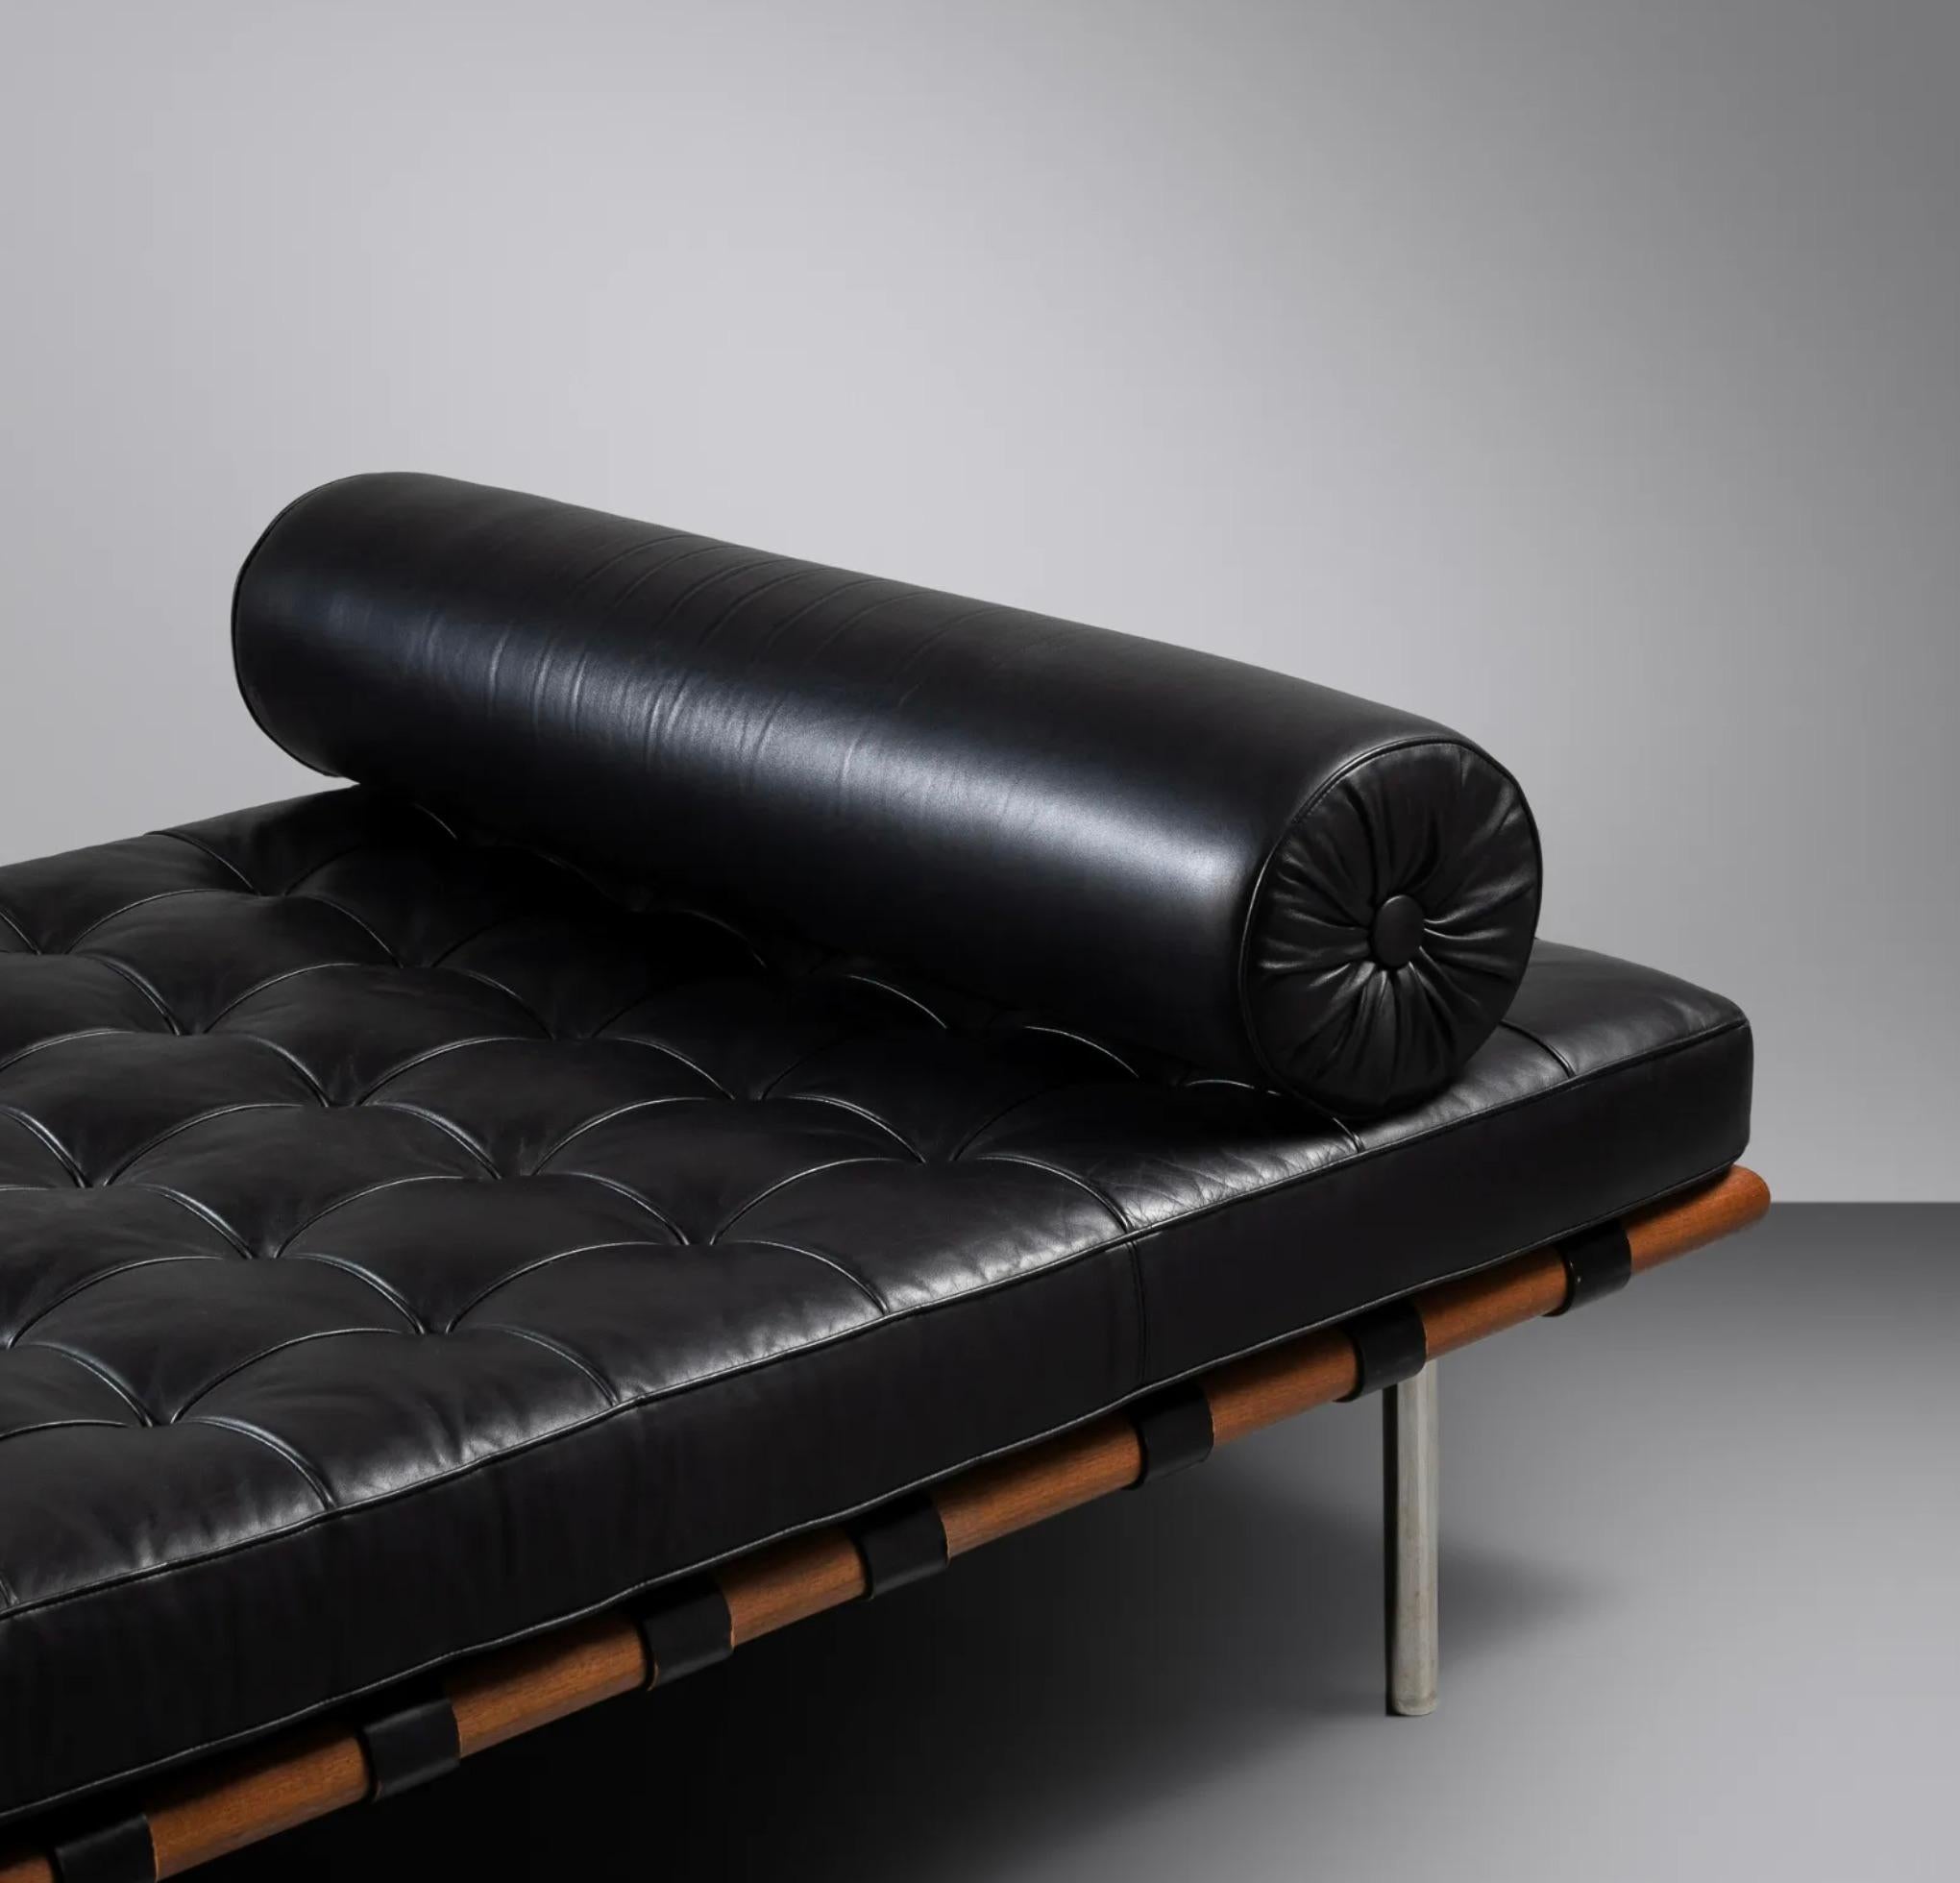 Ludwig Mies Van Der Rohe Daybed
Manufactured By Knoll
1970s Production
Walnut frame
Beautiful Black Leather
Cloth Manufacturers label